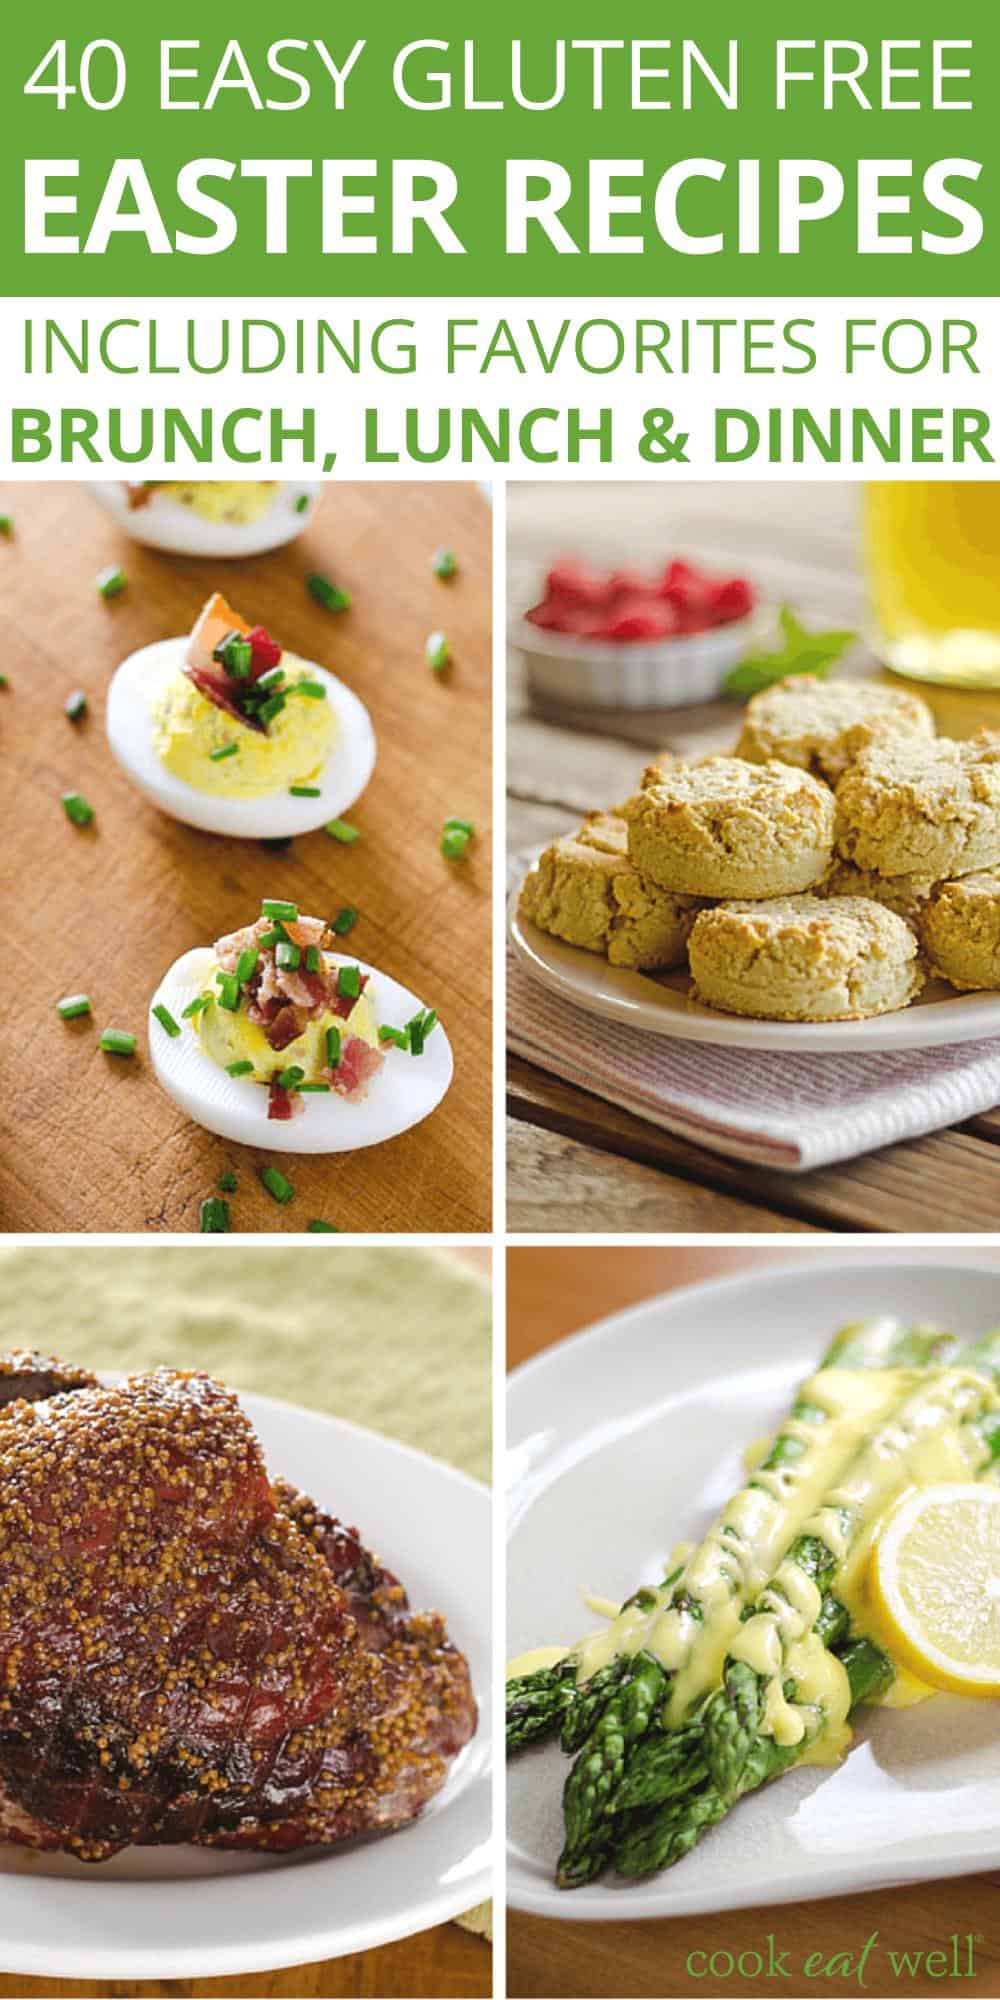 40 Easy Easter Recipes That Are Paleo and Gluten Free - Cook Eat Well